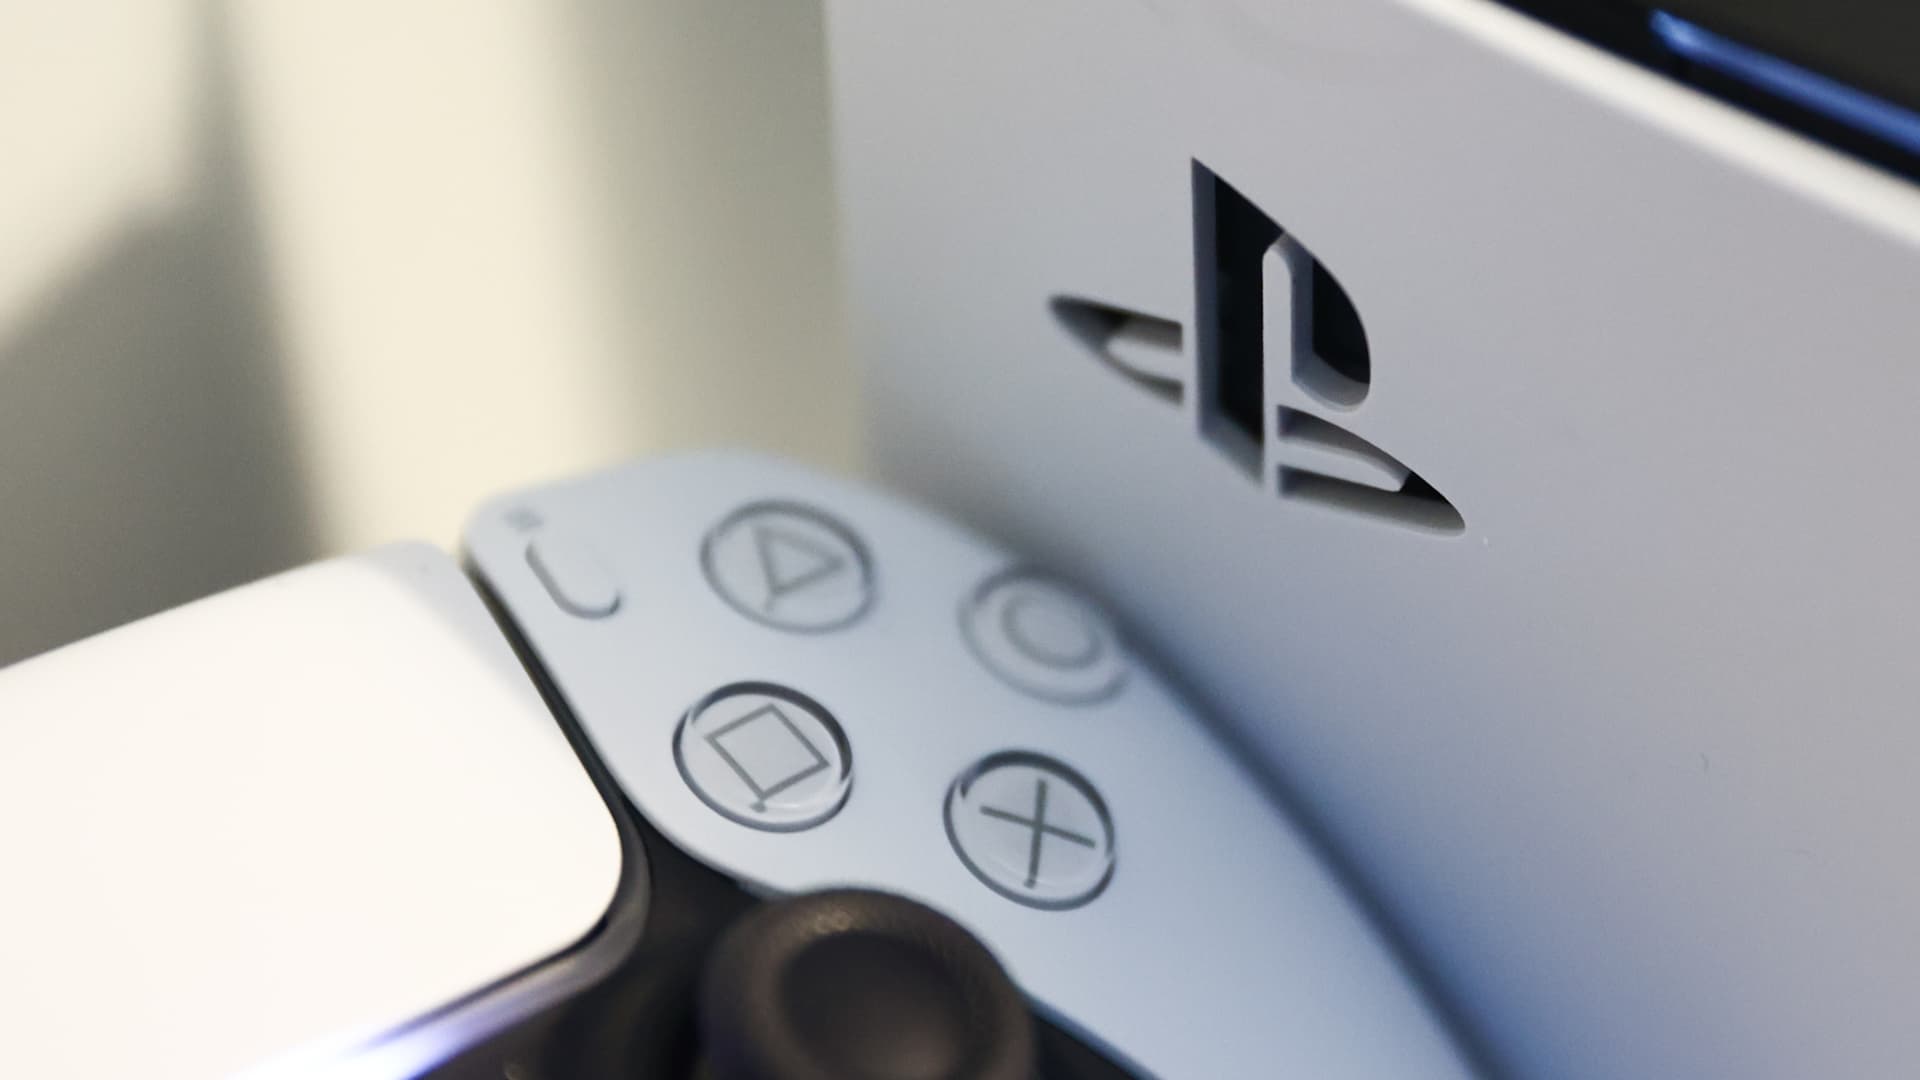 Sony is making a bold bet on an African gaming startup to boost PlayStation’s reach in the continent